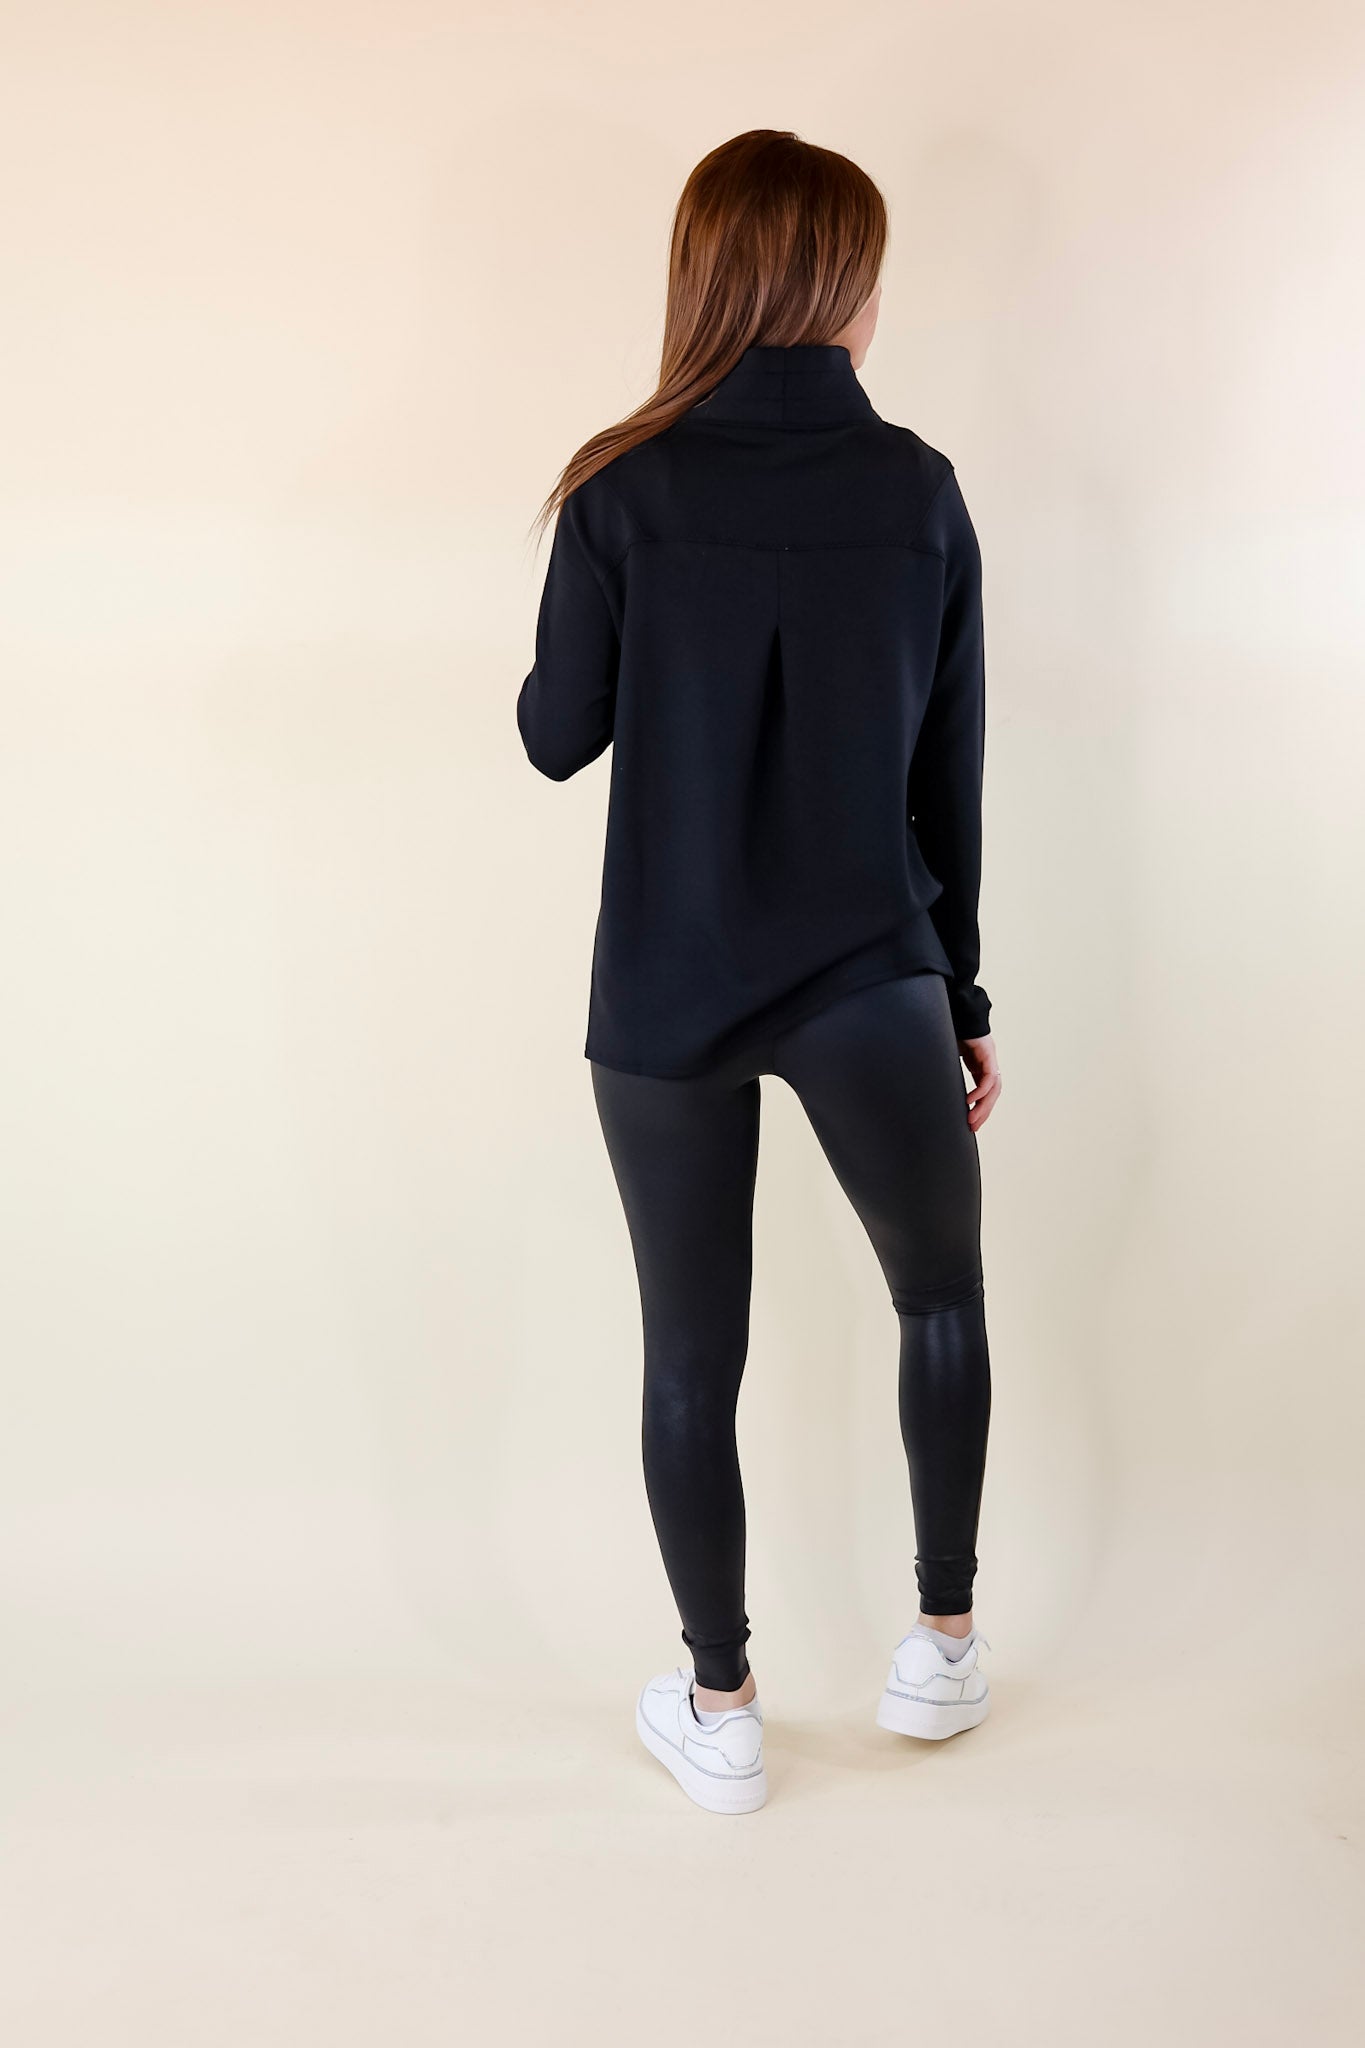 SPANX | AirEssentials Got-Ya-Covered Pullover Sweatshirt in Black - Giddy Up Glamour Boutique